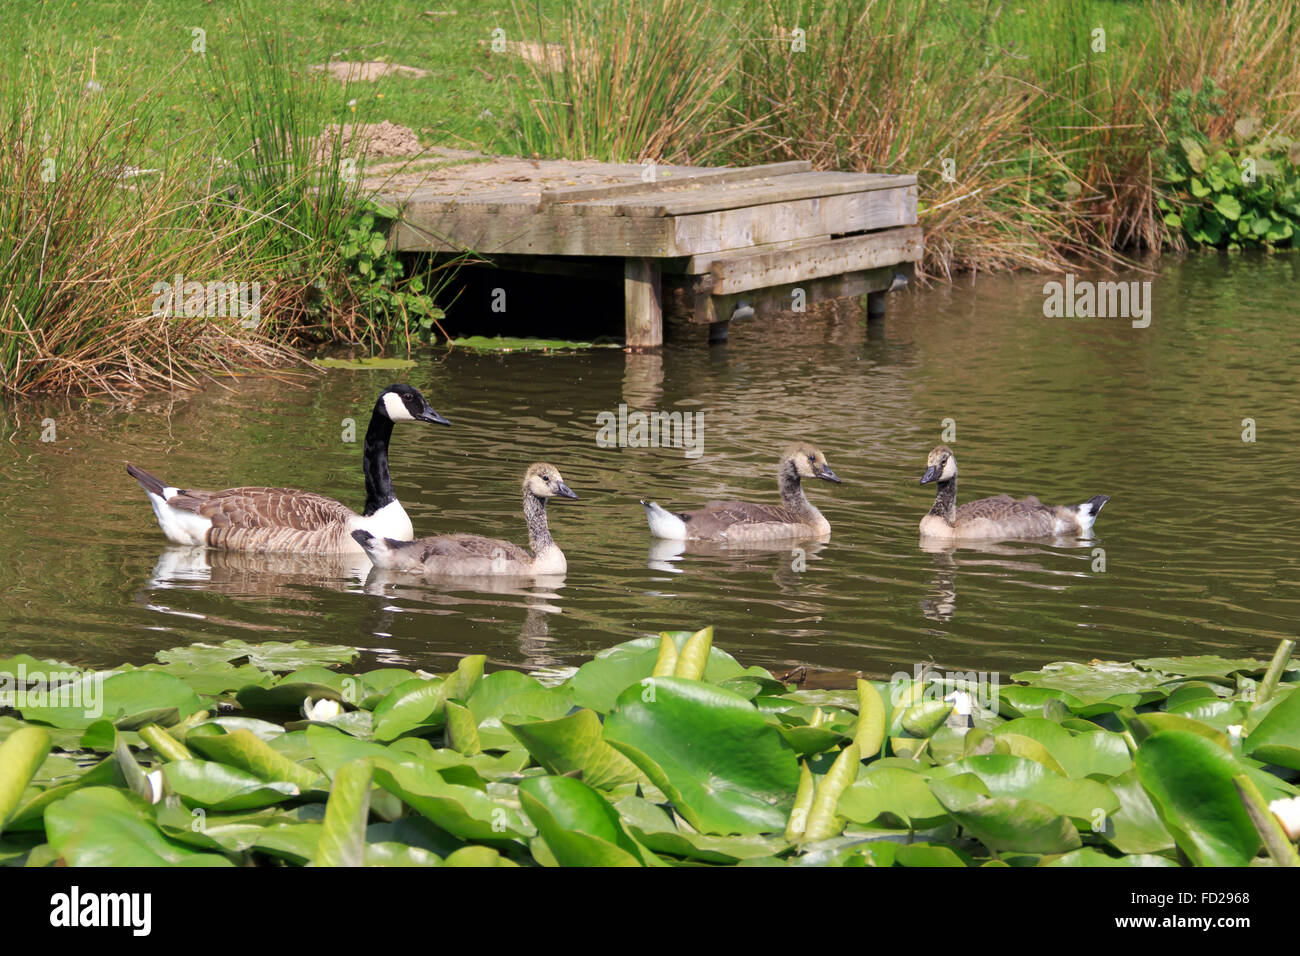 Canada Goose with three juveniles swimming on pond near a fishing platform Stock Photo